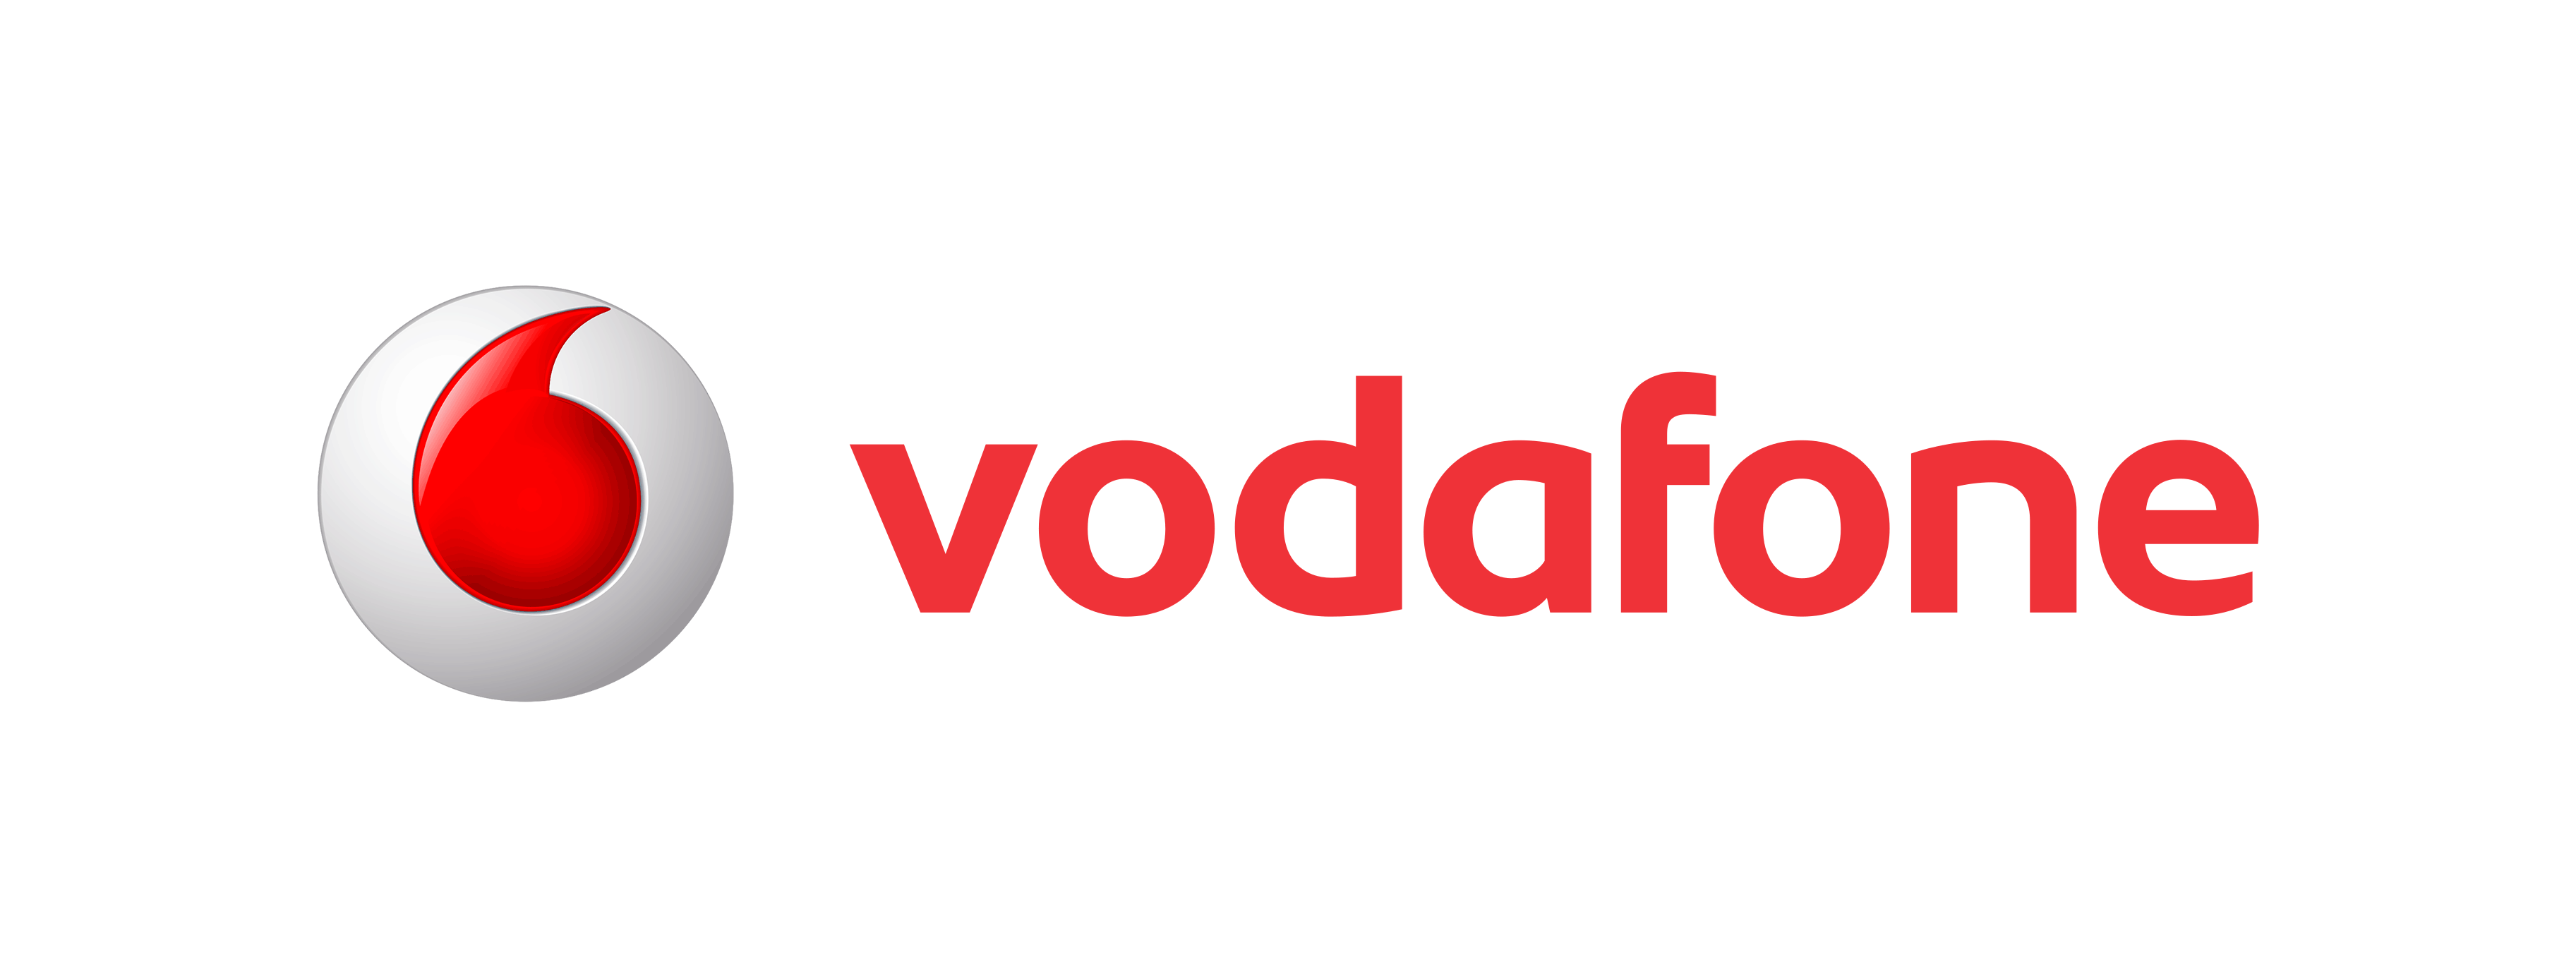 Vodafone Logo Png Image With Transparent Background Toppng Images